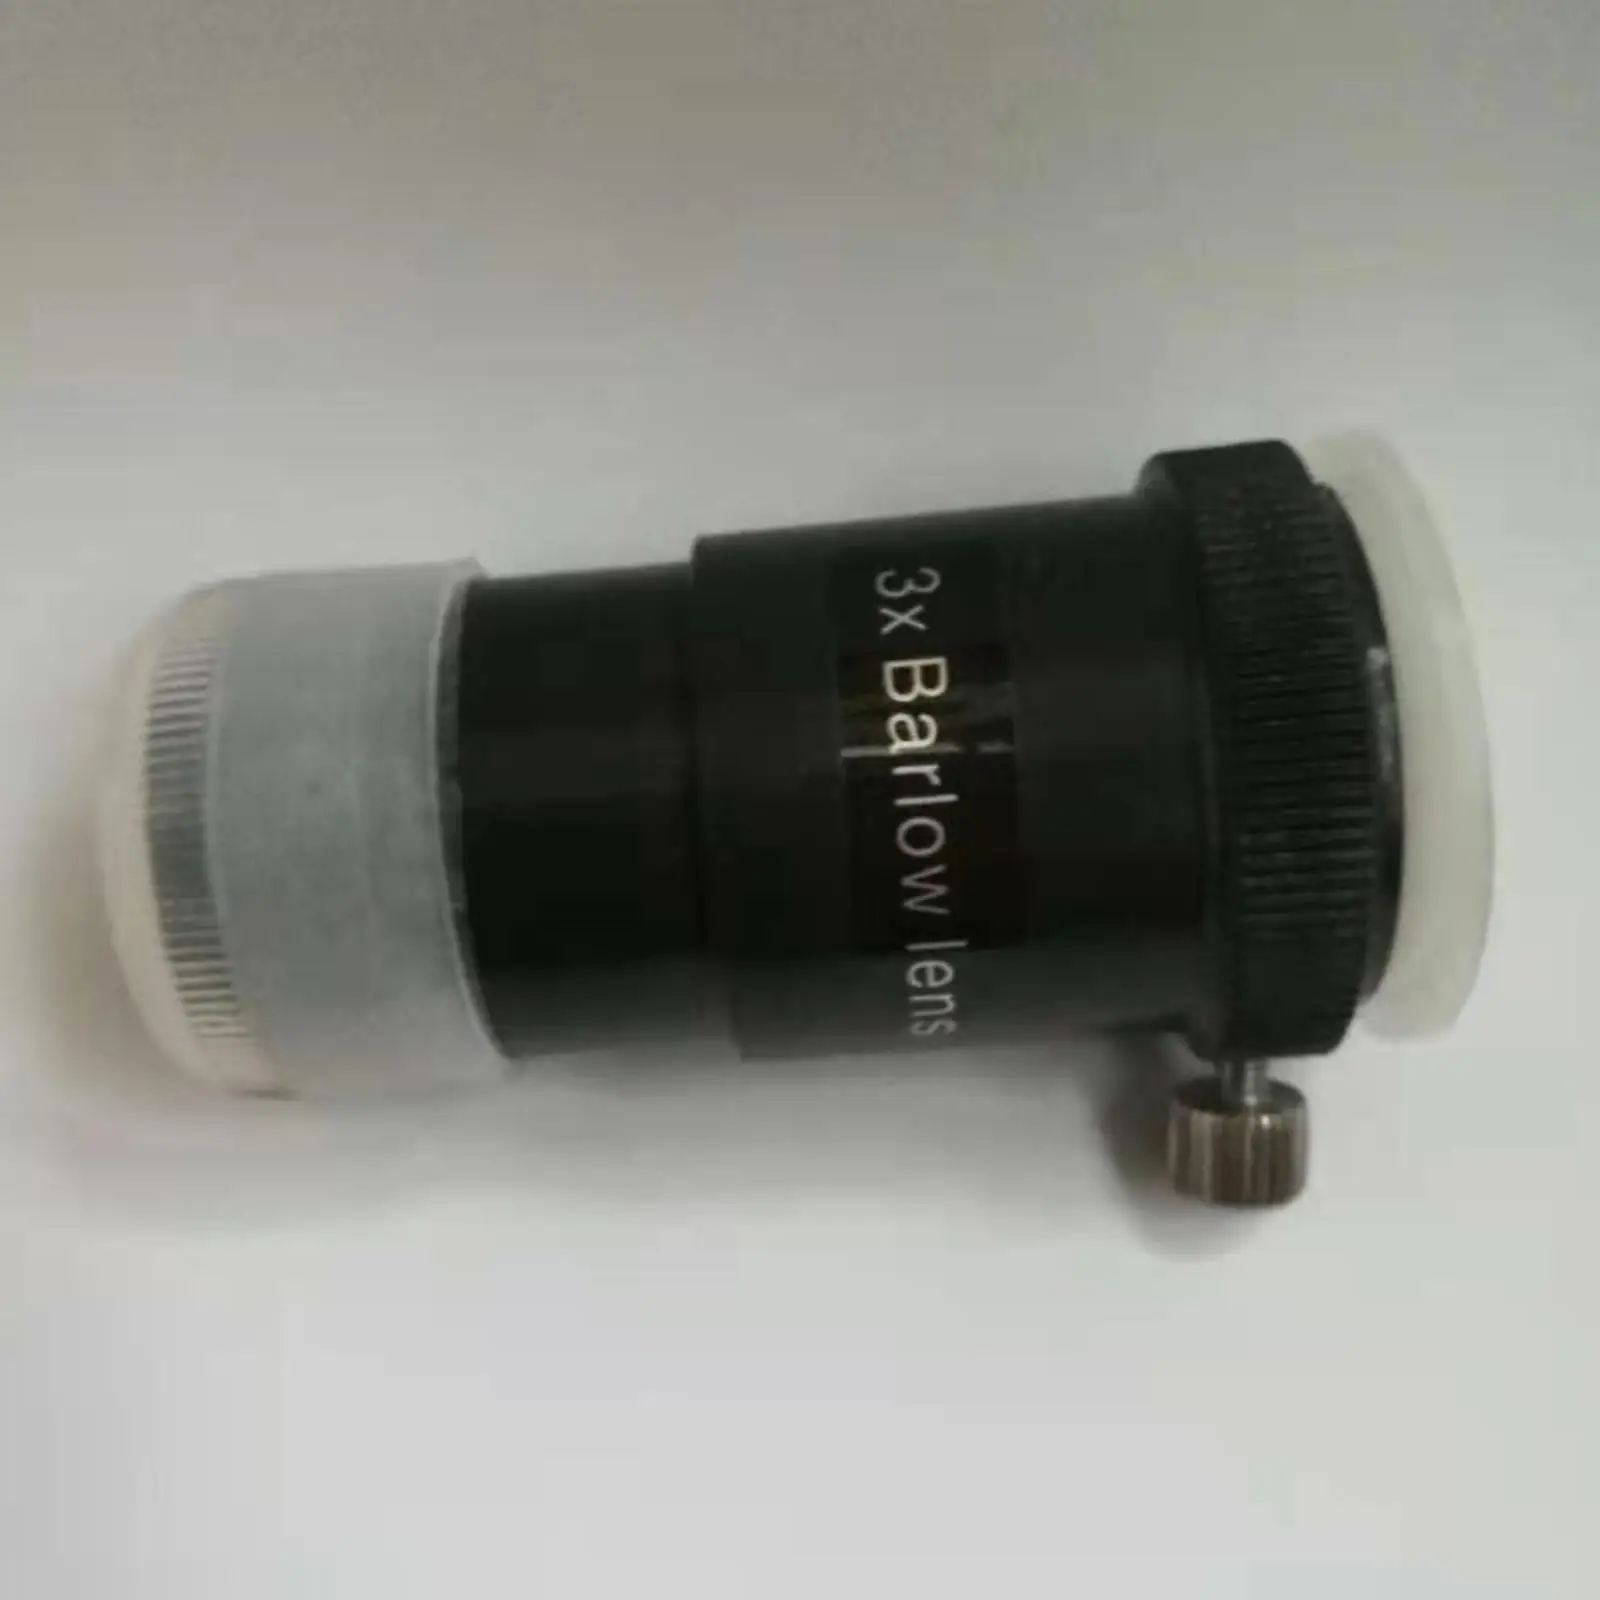 Telescope Eyepiece X Magnification 1.25inch Universal Multicoated